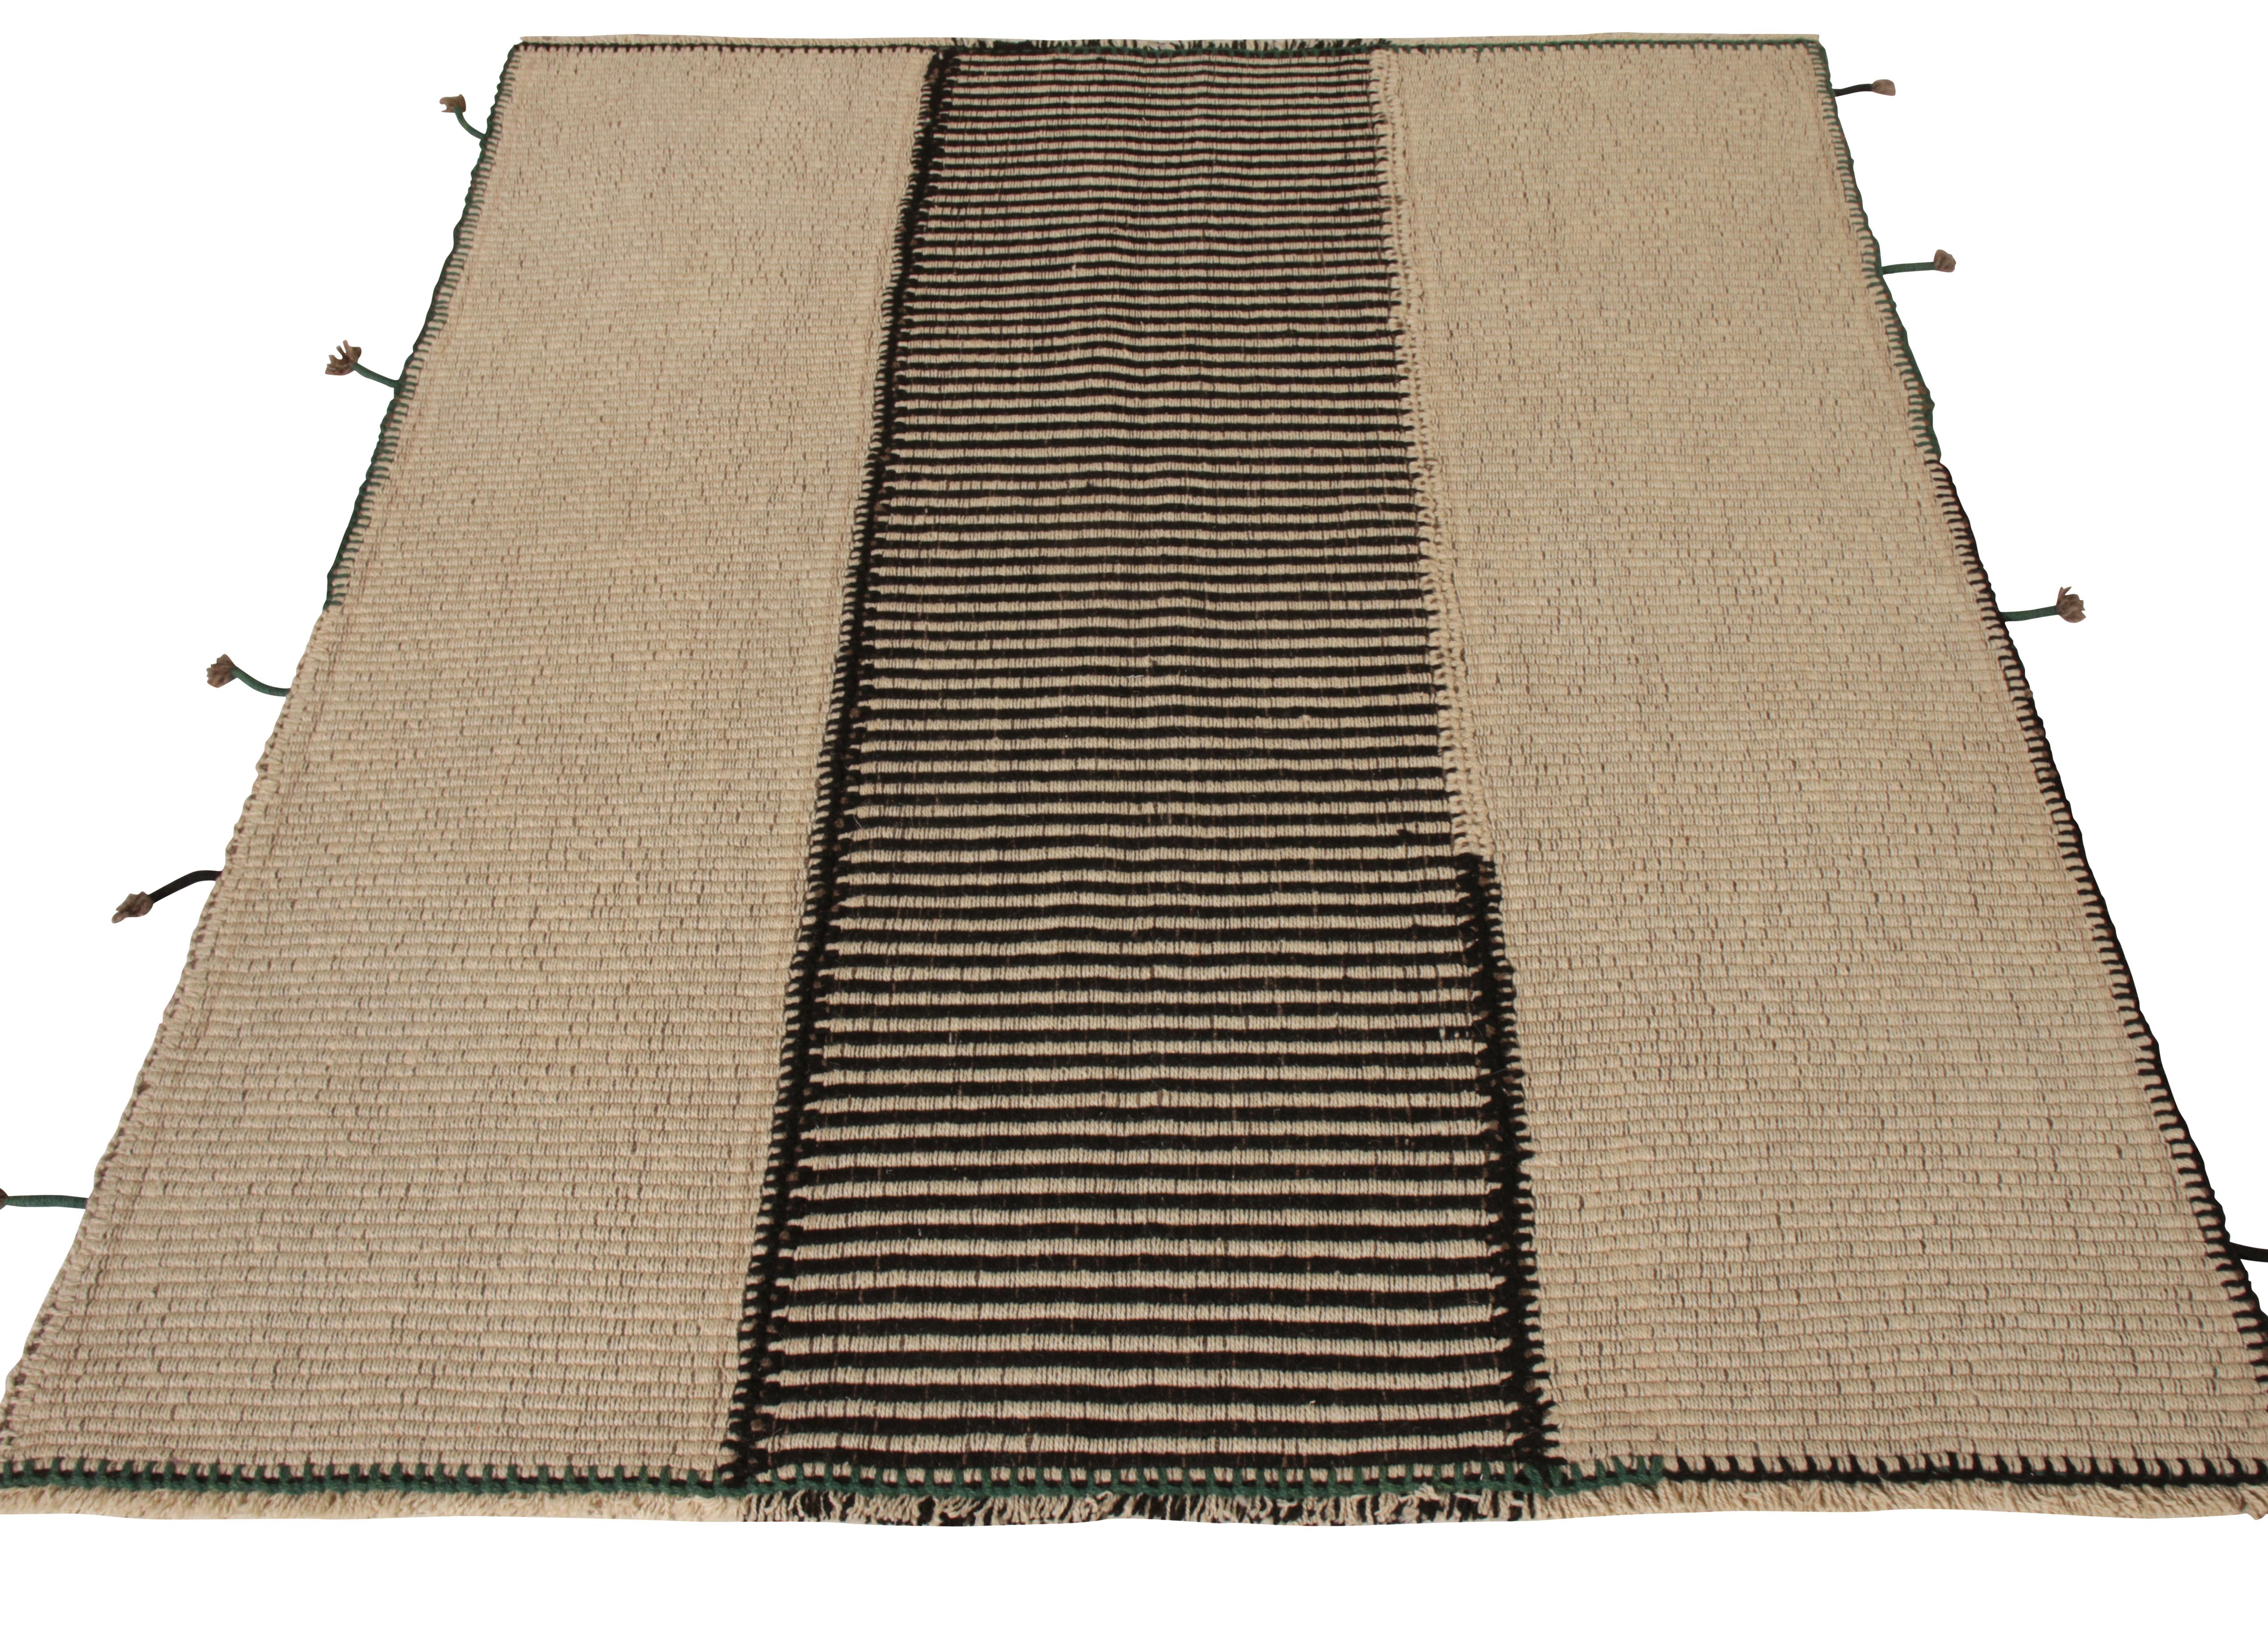 Rug & Kilim boasts its latest style of paneled Kilim rug with a unique textural look, now available for custom Kilim rug designs. Handwoven in wool with a striped, paneled style for an even spread on the floor, this 5x6 example combines